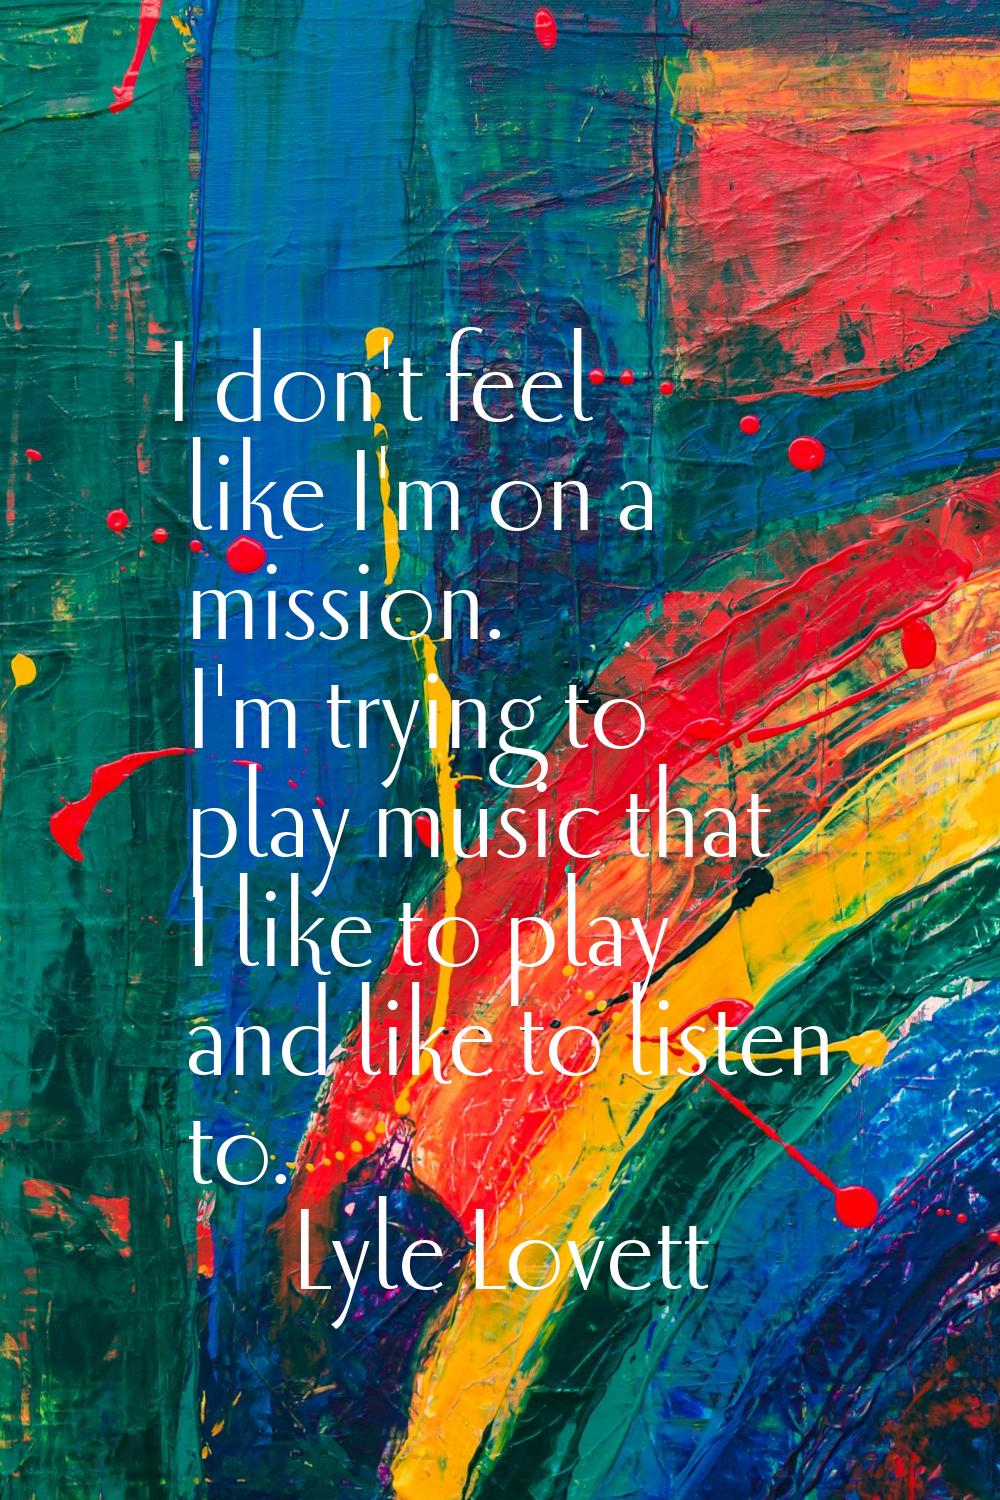 I don't feel like I'm on a mission. I'm trying to play music that I like to play and like to listen